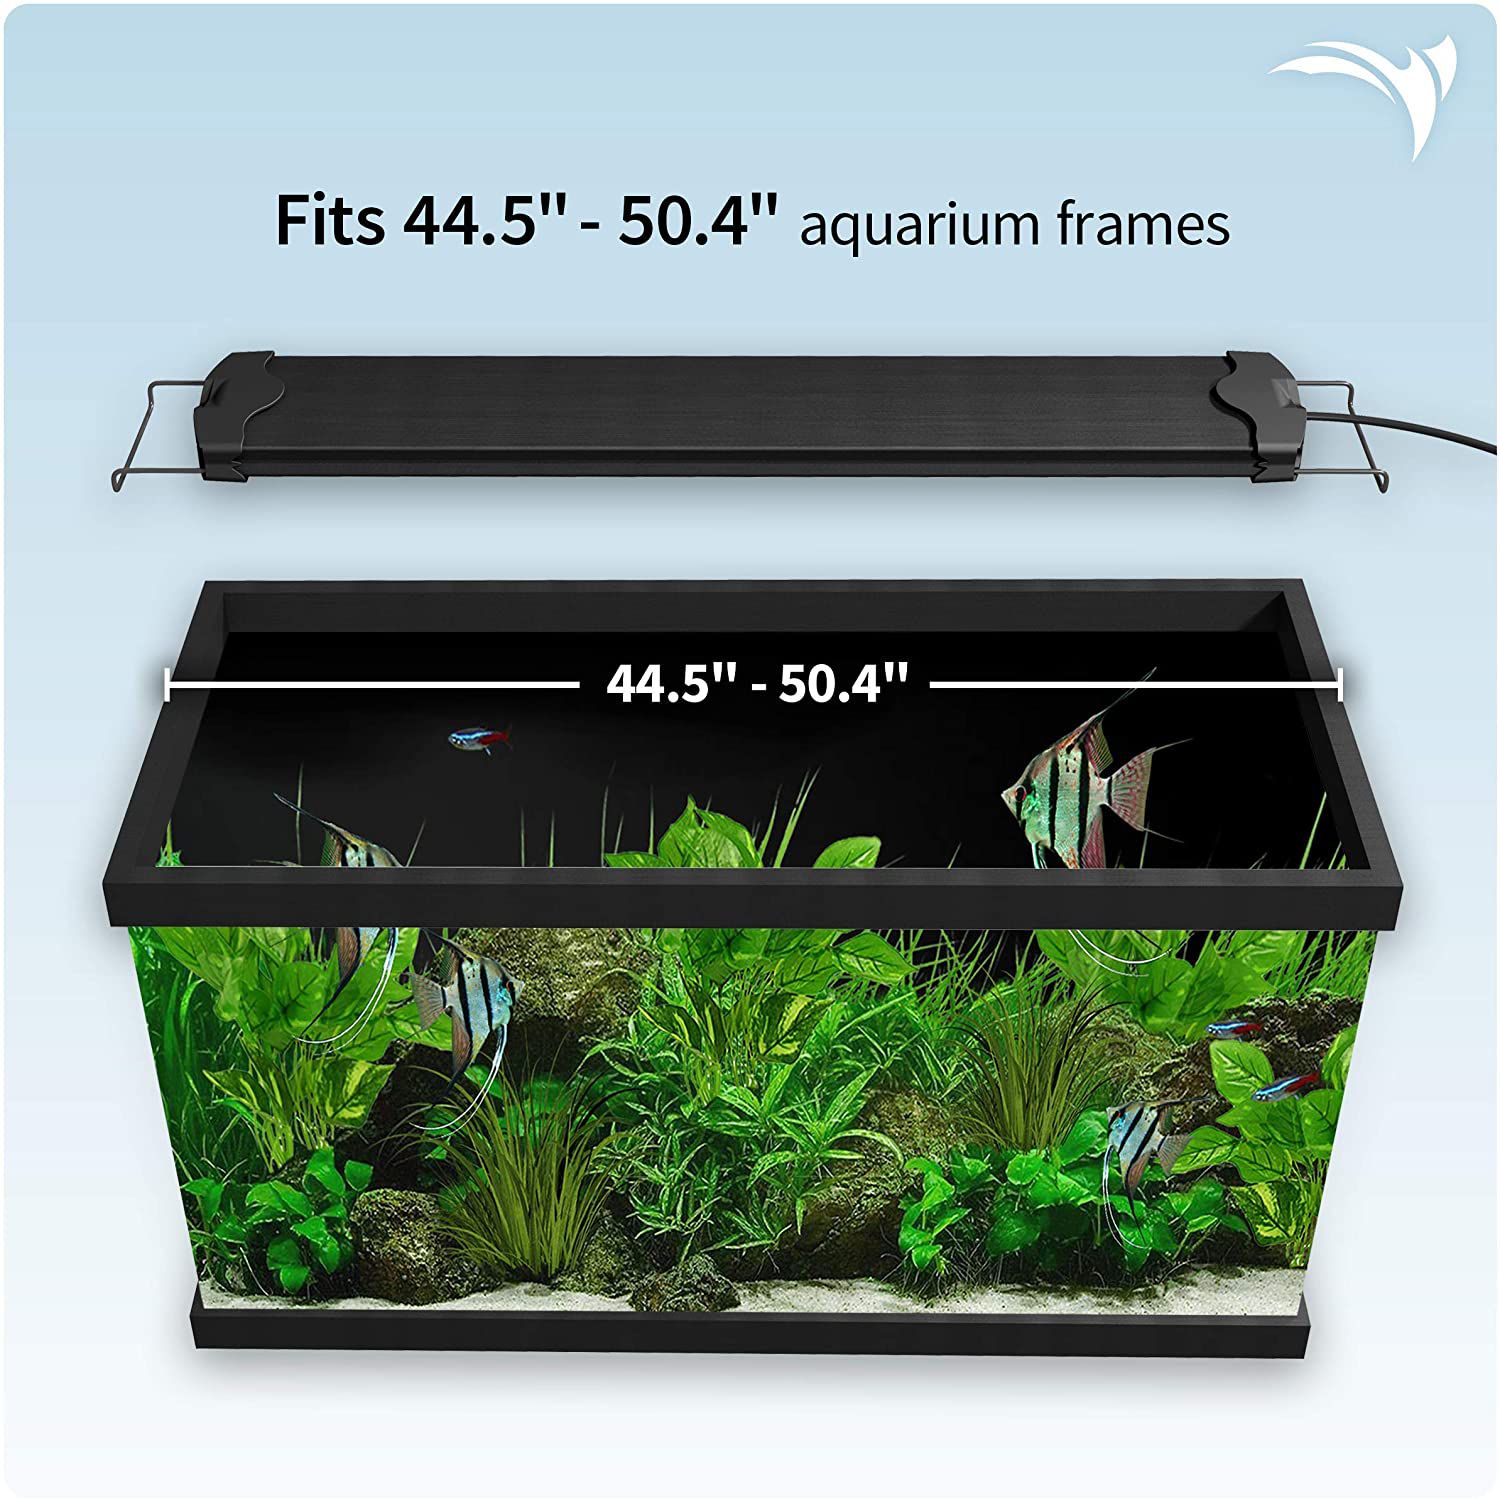 Aquaticlife HM Electronics Edge Freshwater Wireless LED Aquarium Light Fixture with Full Spectrum Color Lighting Unit 48-Inch Strip Wireless Controlled Smart Lights